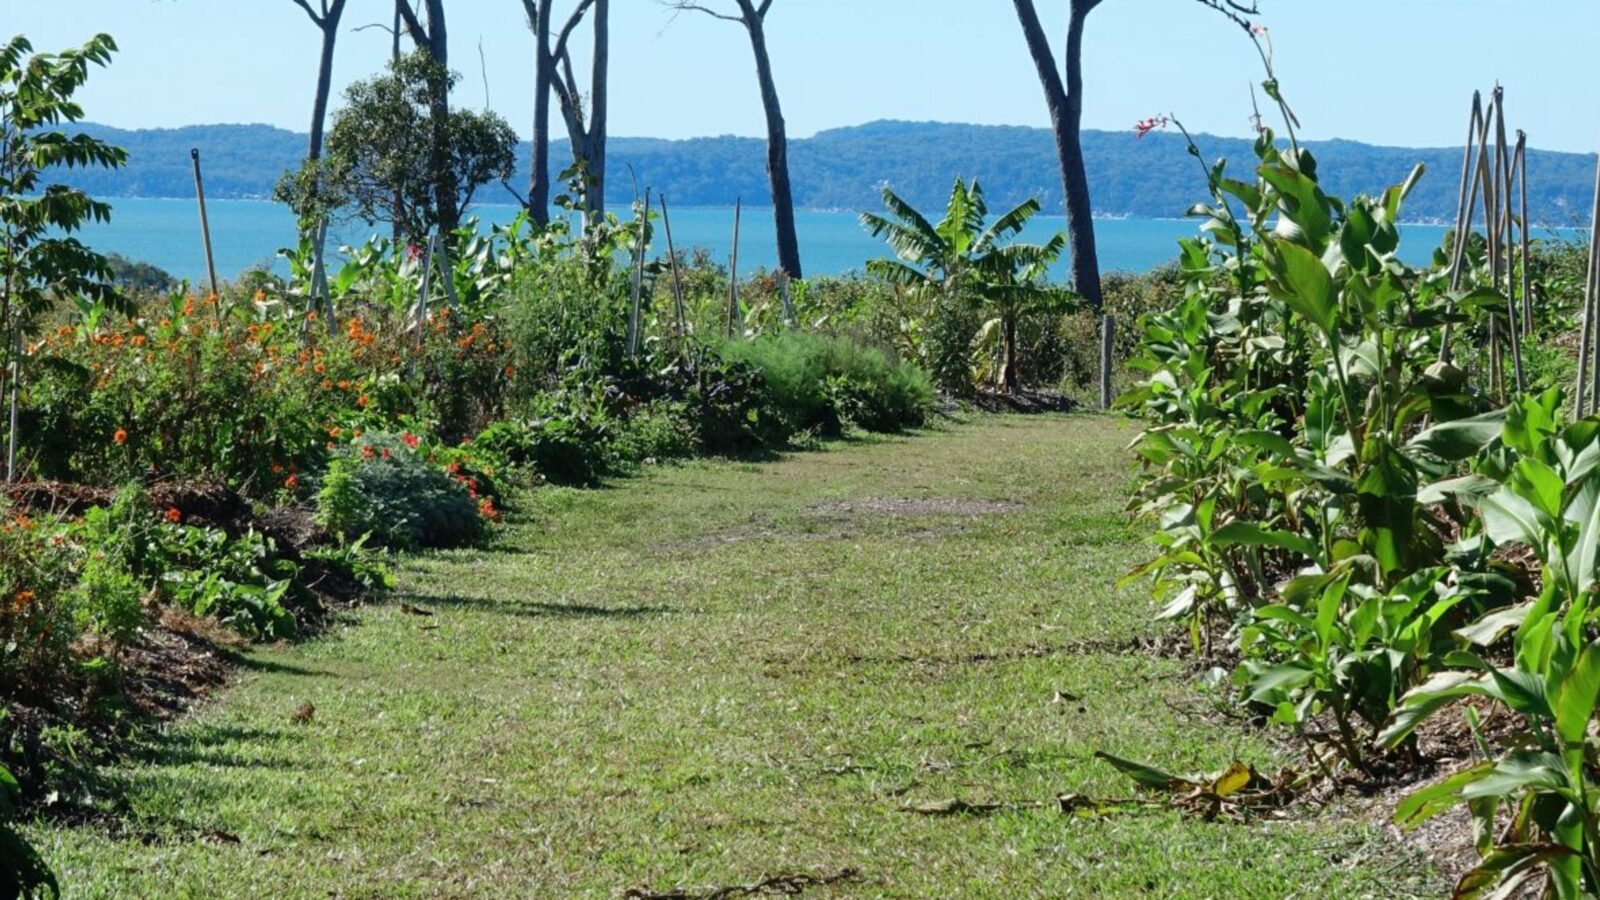 View along the developing food forest rows